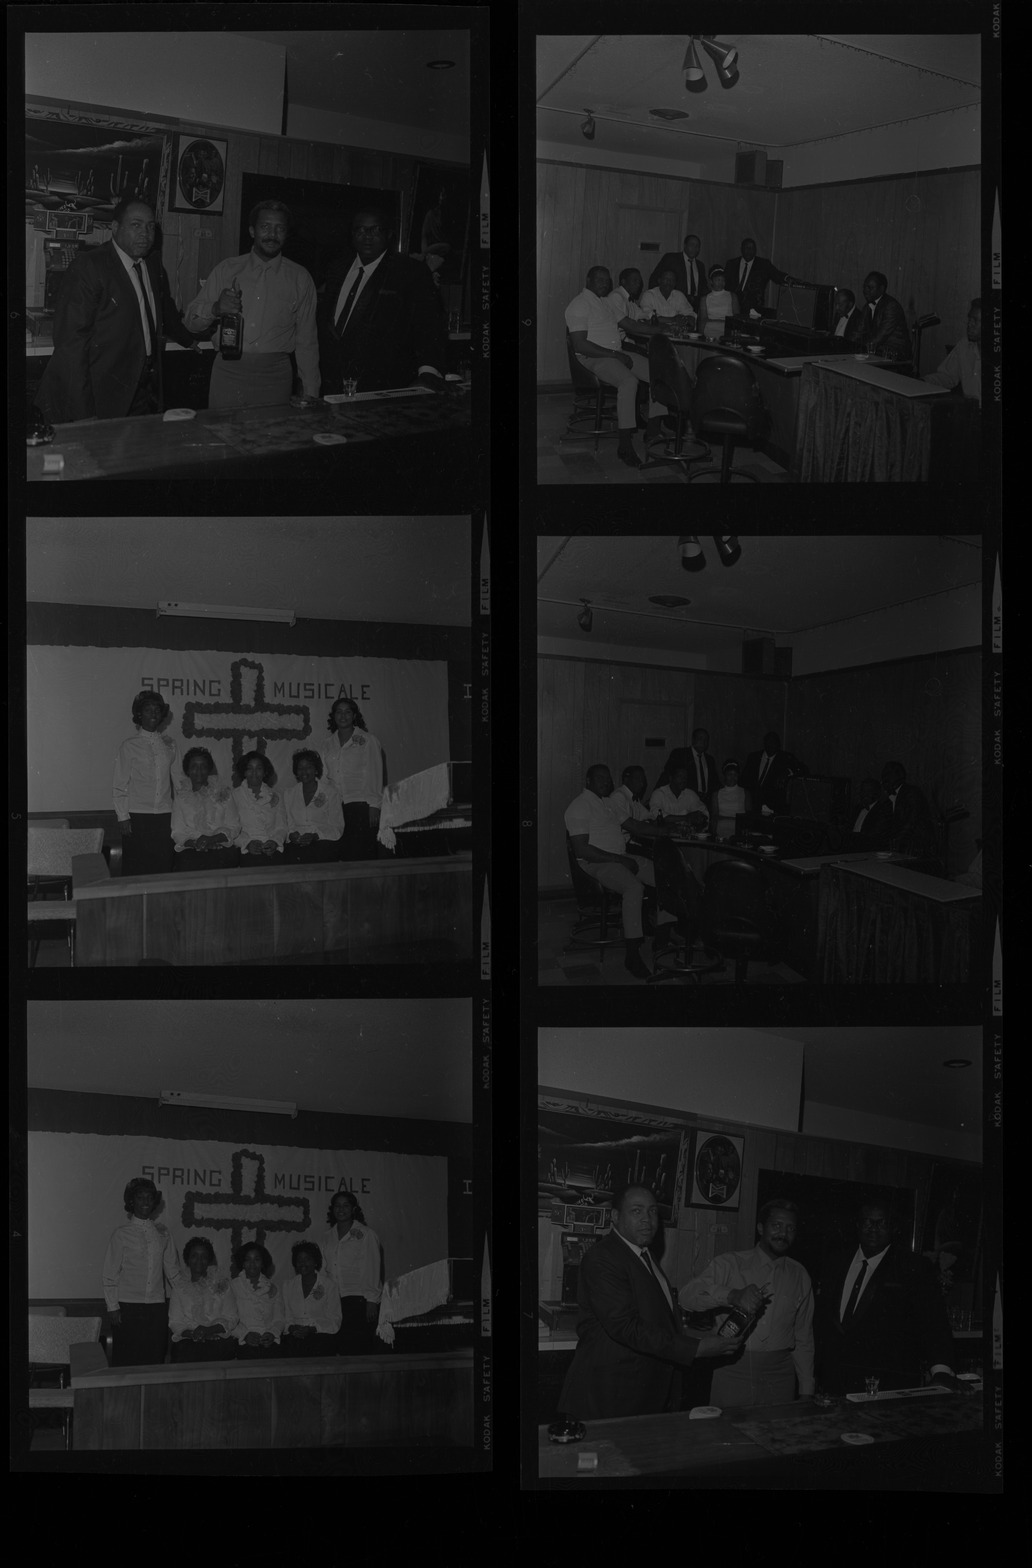 Set of negatives by Clinton Wright including Victory Baptist Choir, Love's Cocktail Lounge, Easter Program at Upperoom, and basketball tournament at Doolittle, 1970, page 3